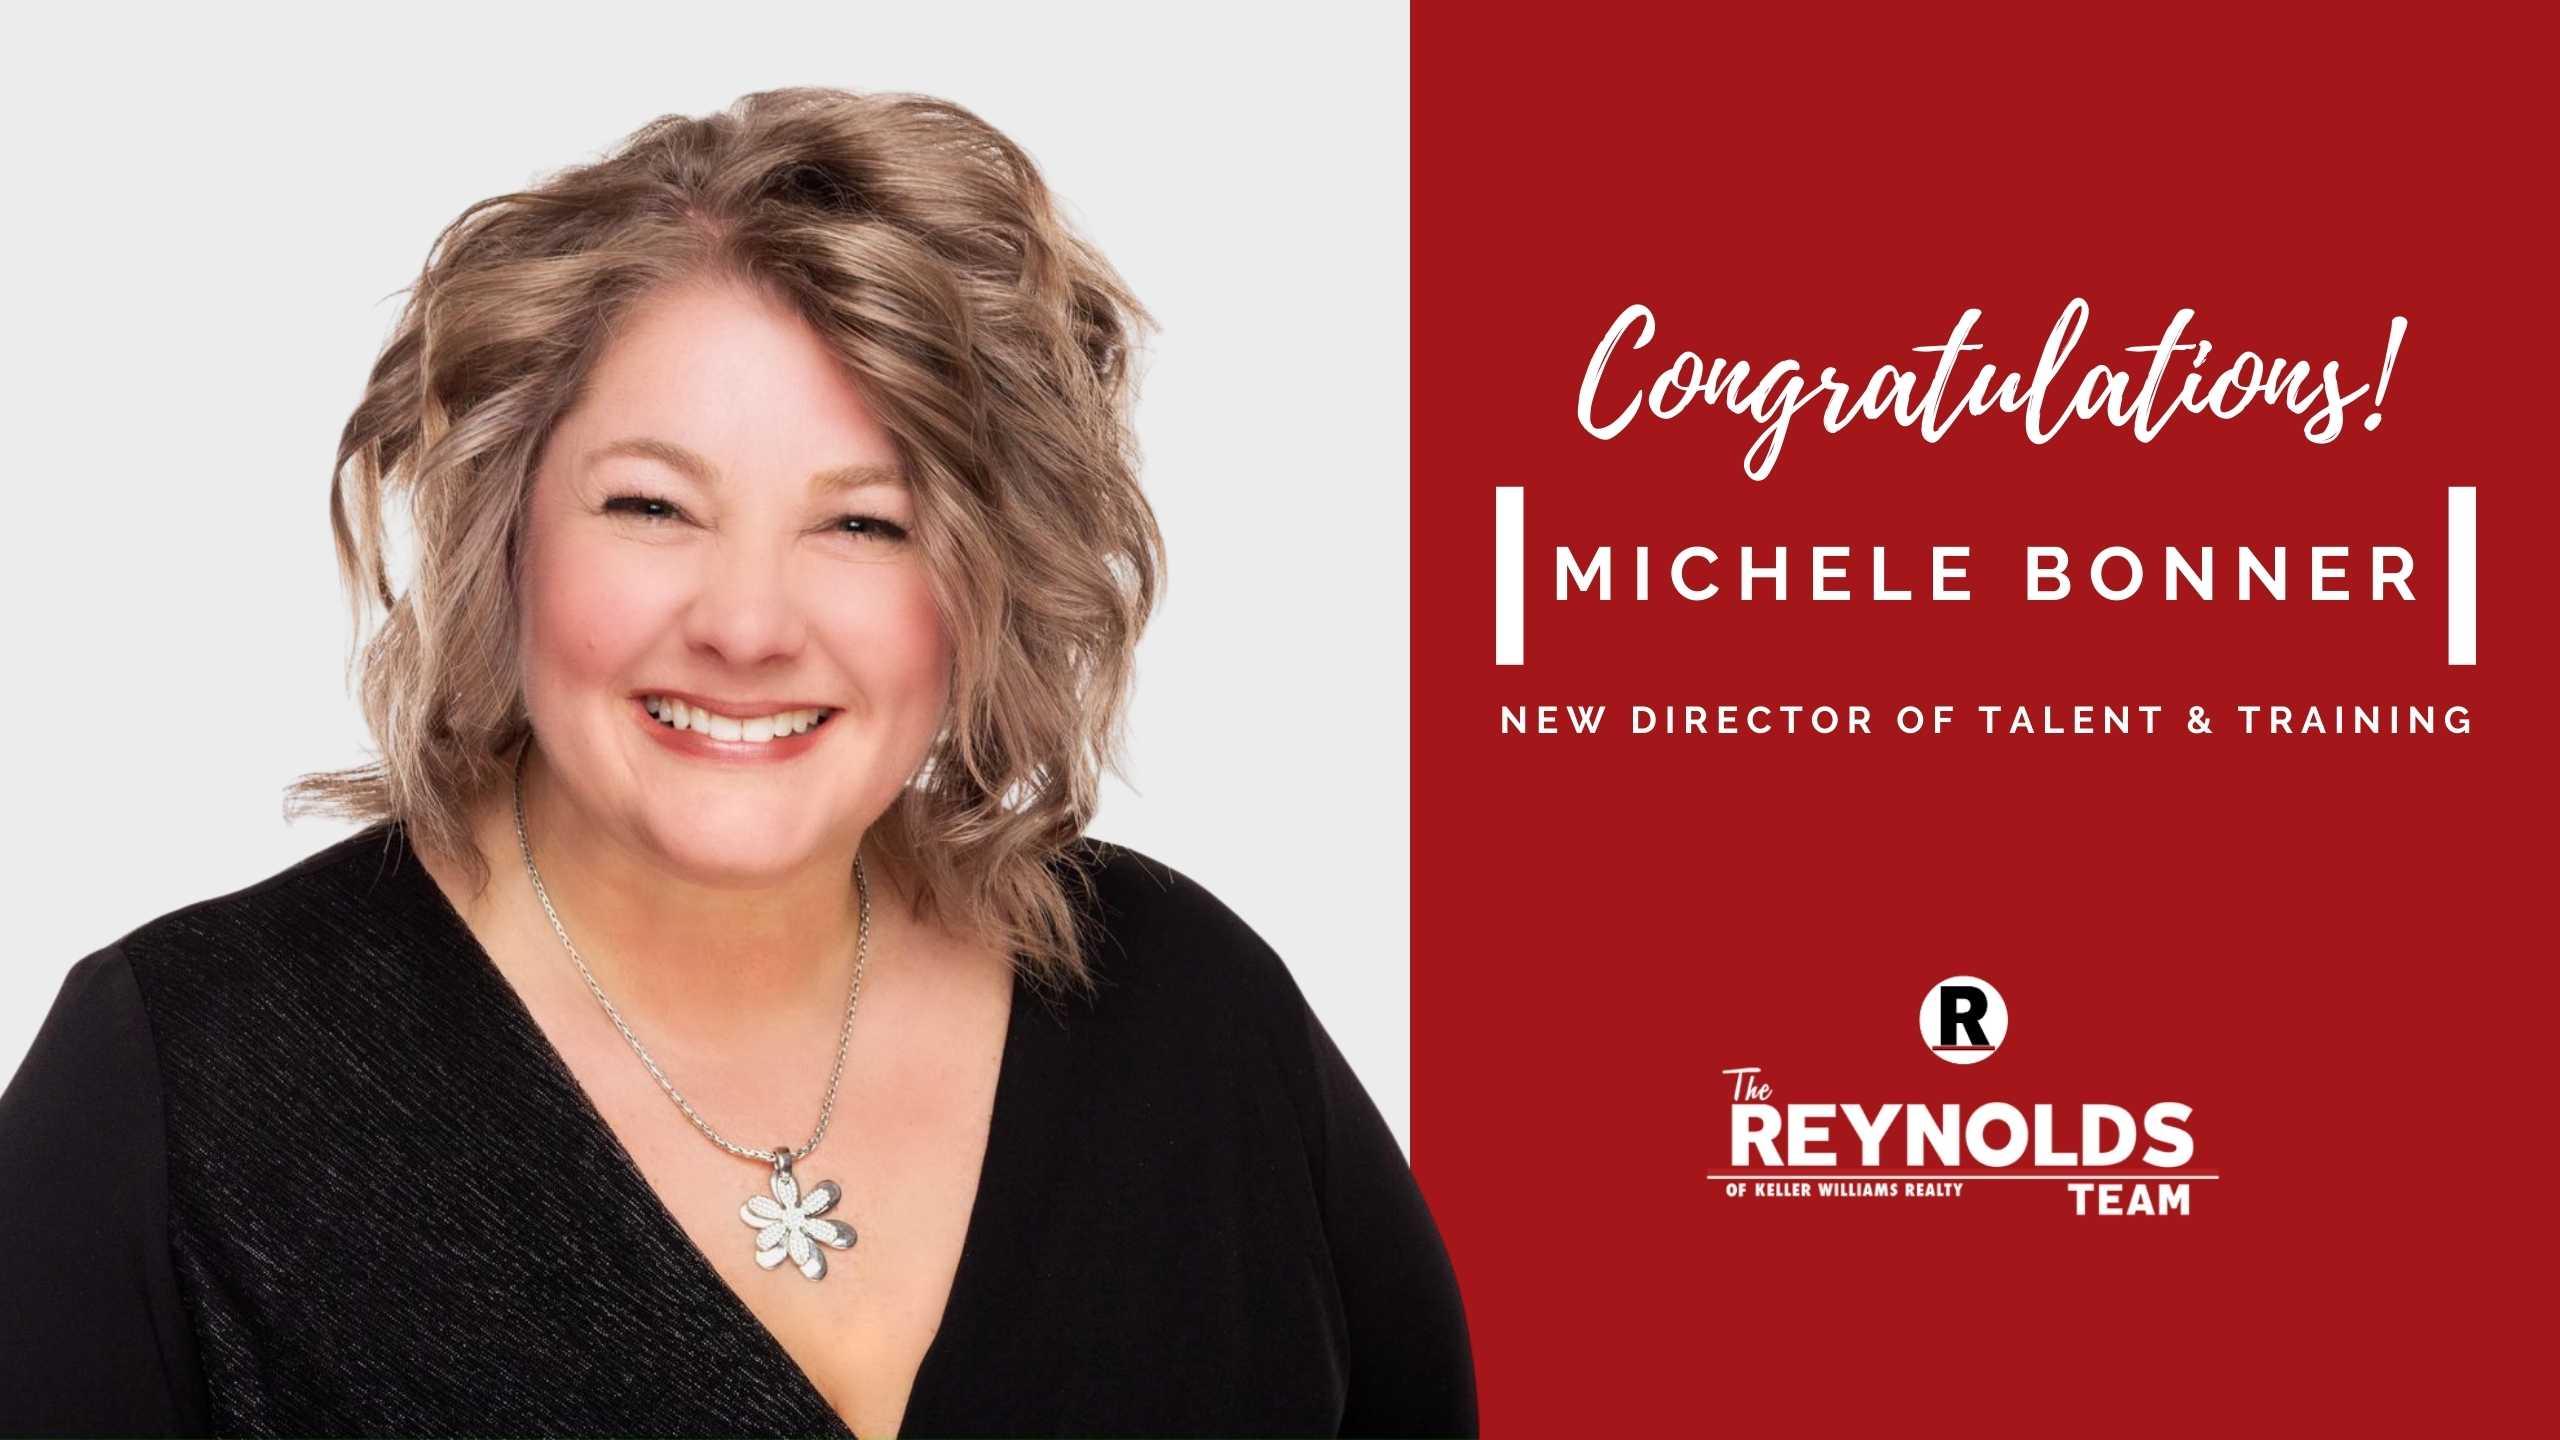 Congratulations to our new Director of Talent & Training!